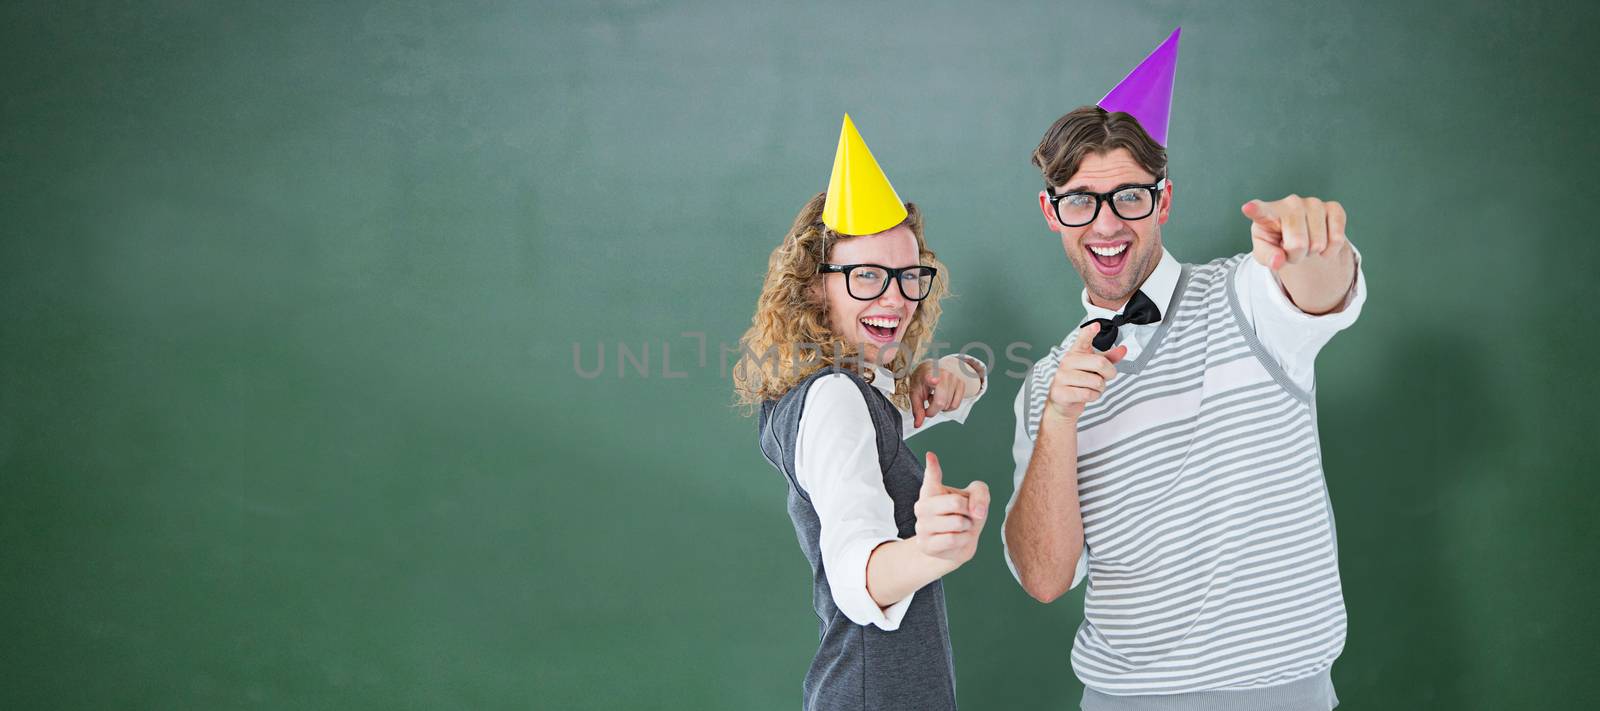 Composite image of happy geeky hispser couple dancing with party hat by Wavebreakmedia